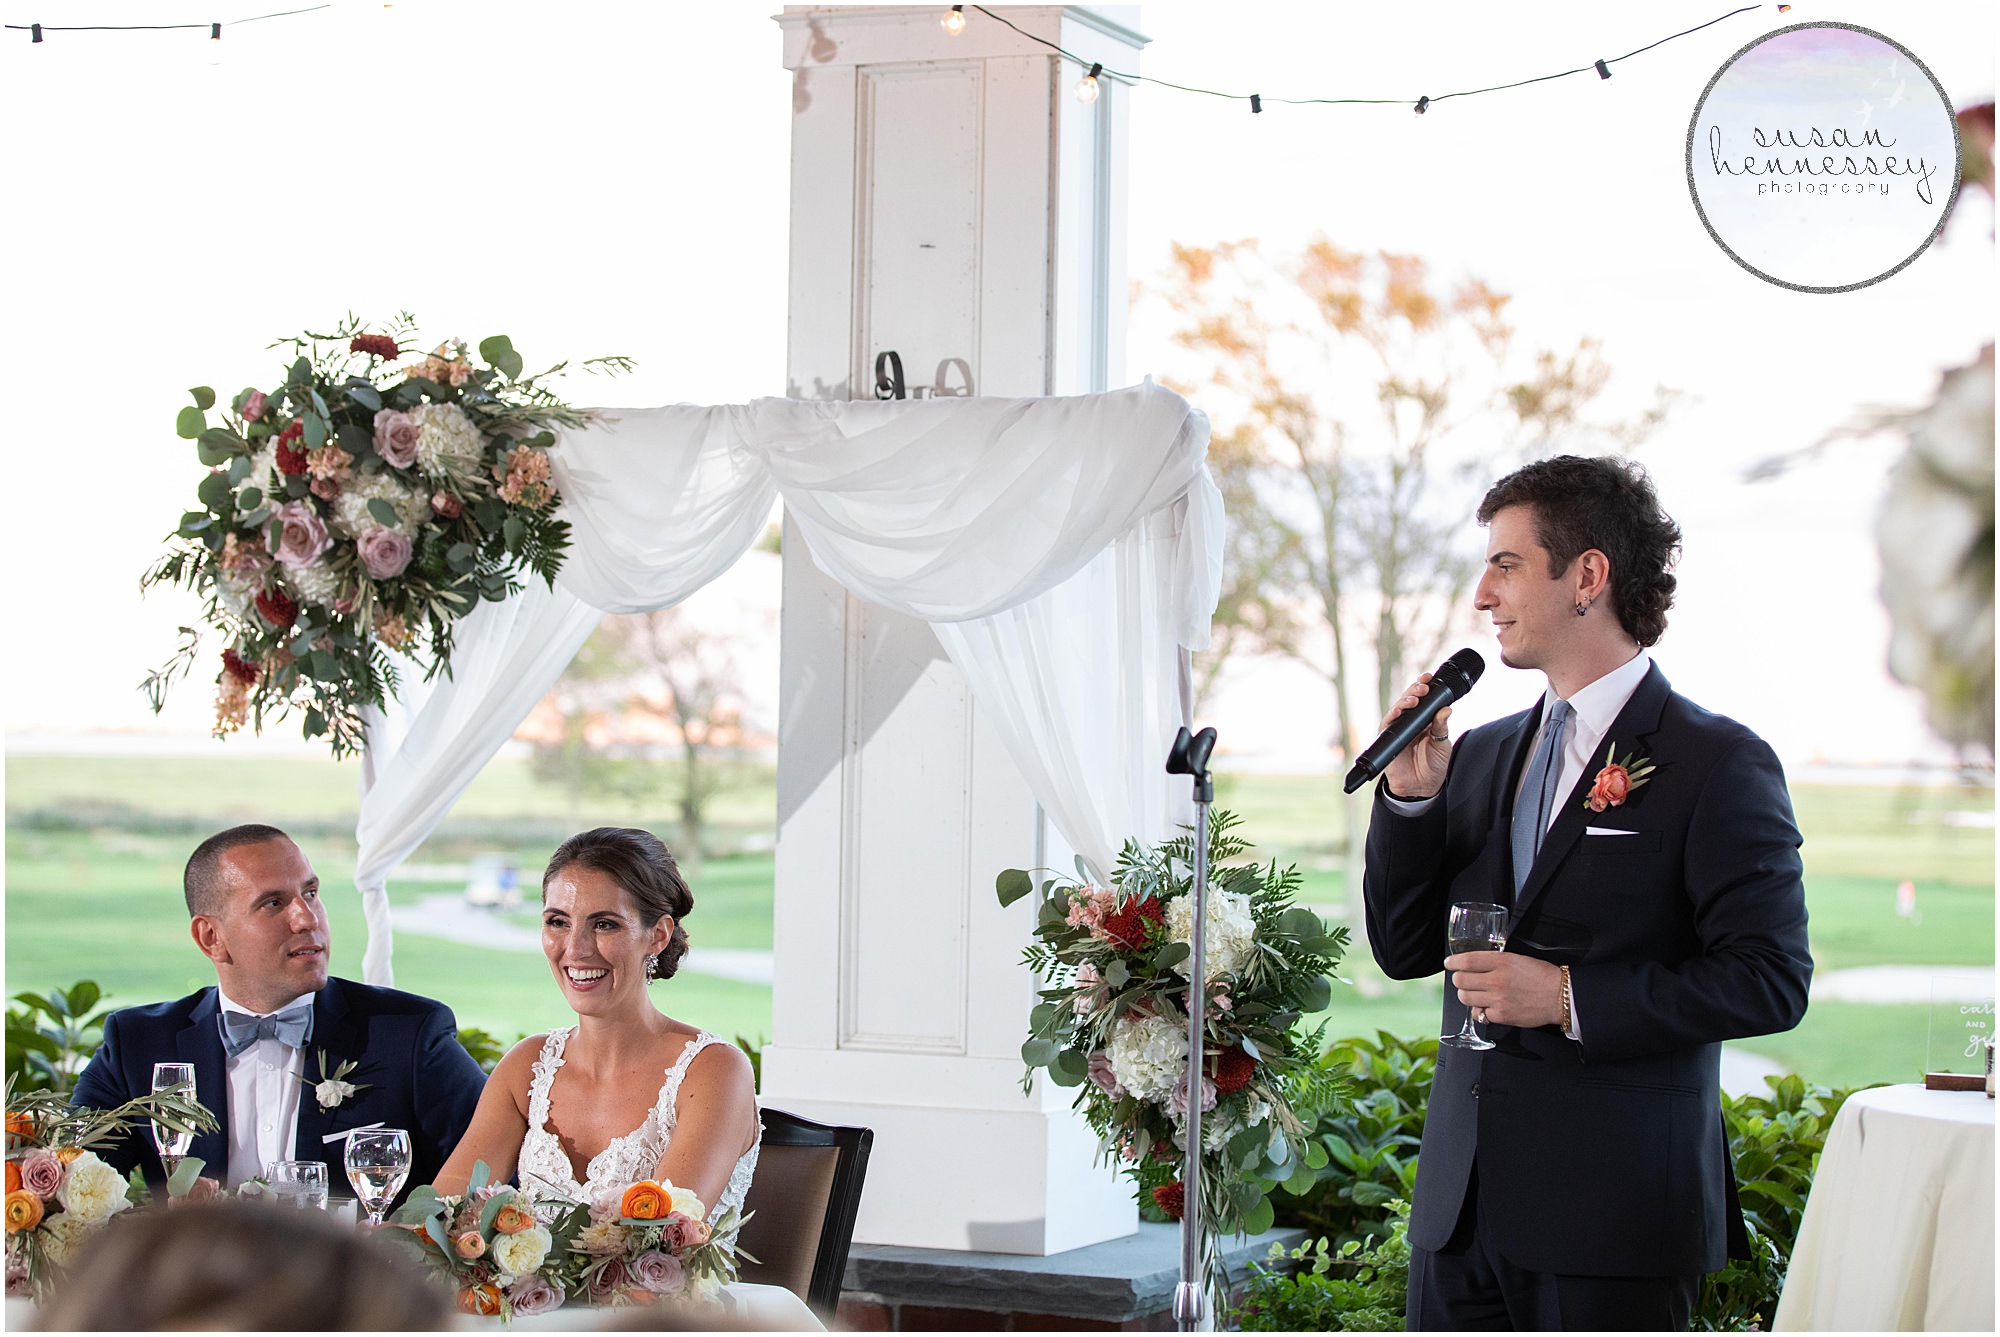 An outdoor reception at Atlantic City Country Club